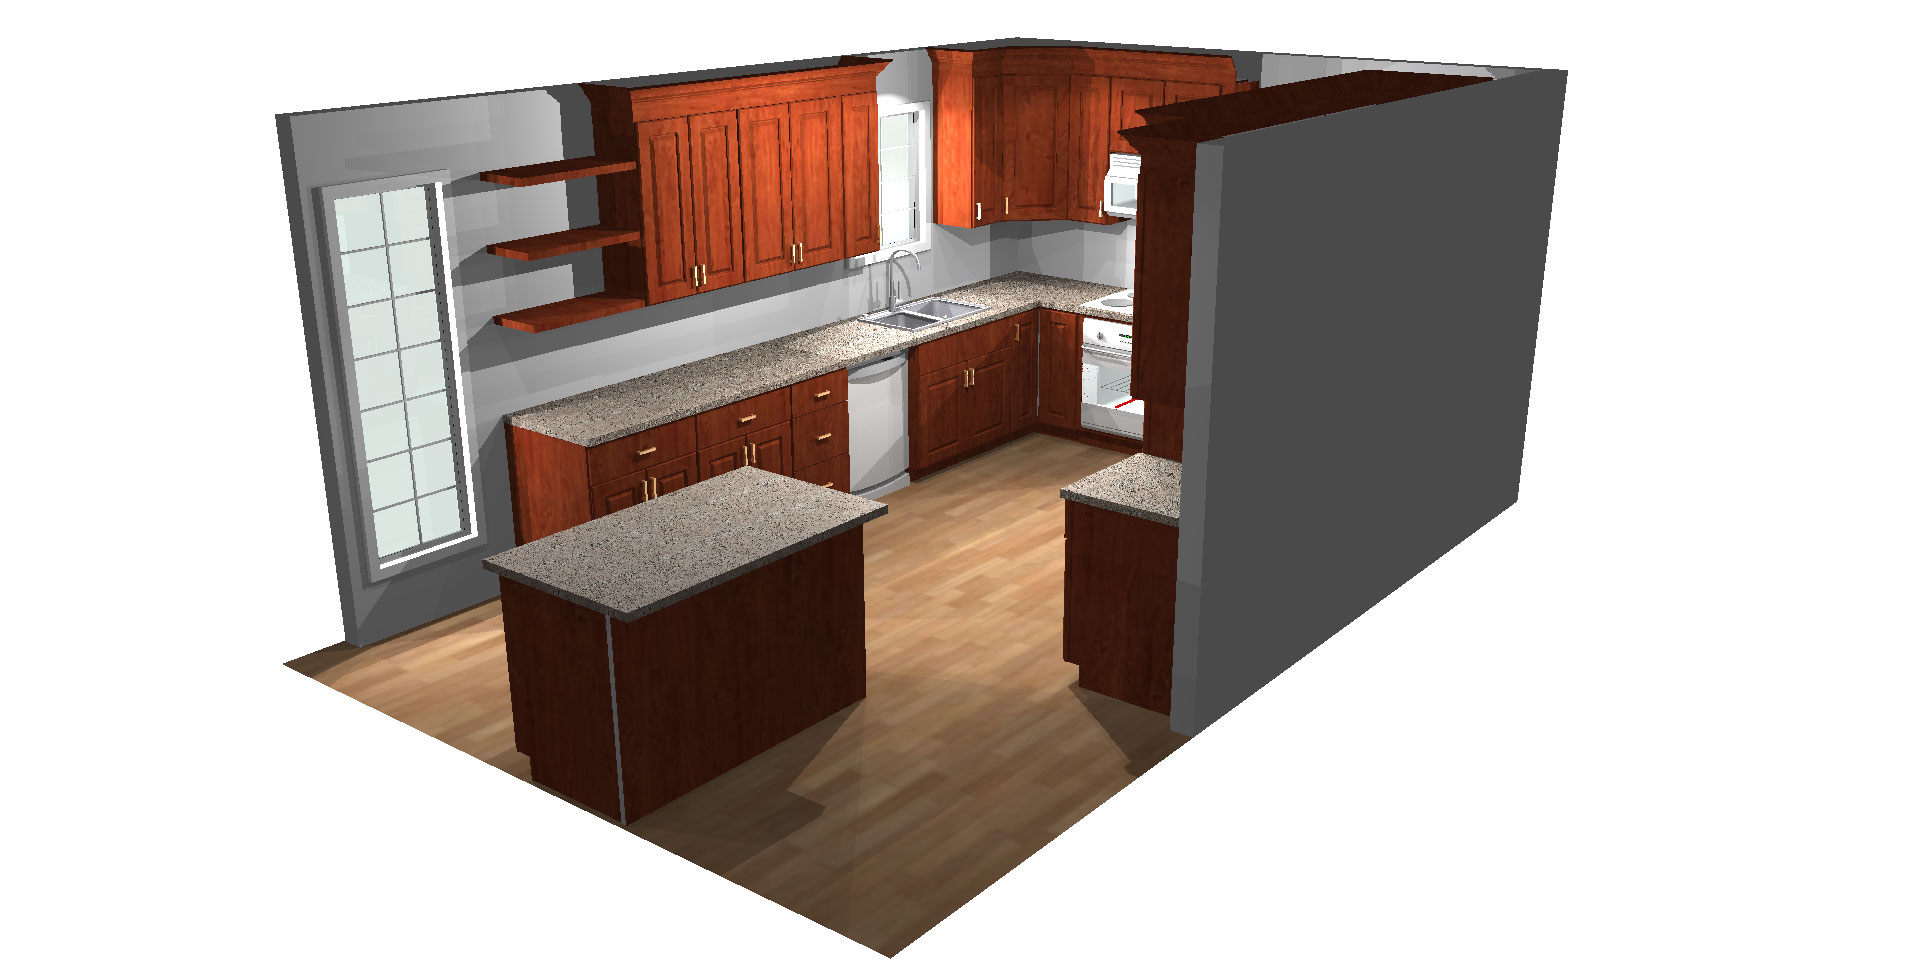 3D render of a modern kitchen remodeling design with sleek cabinetry and countertops